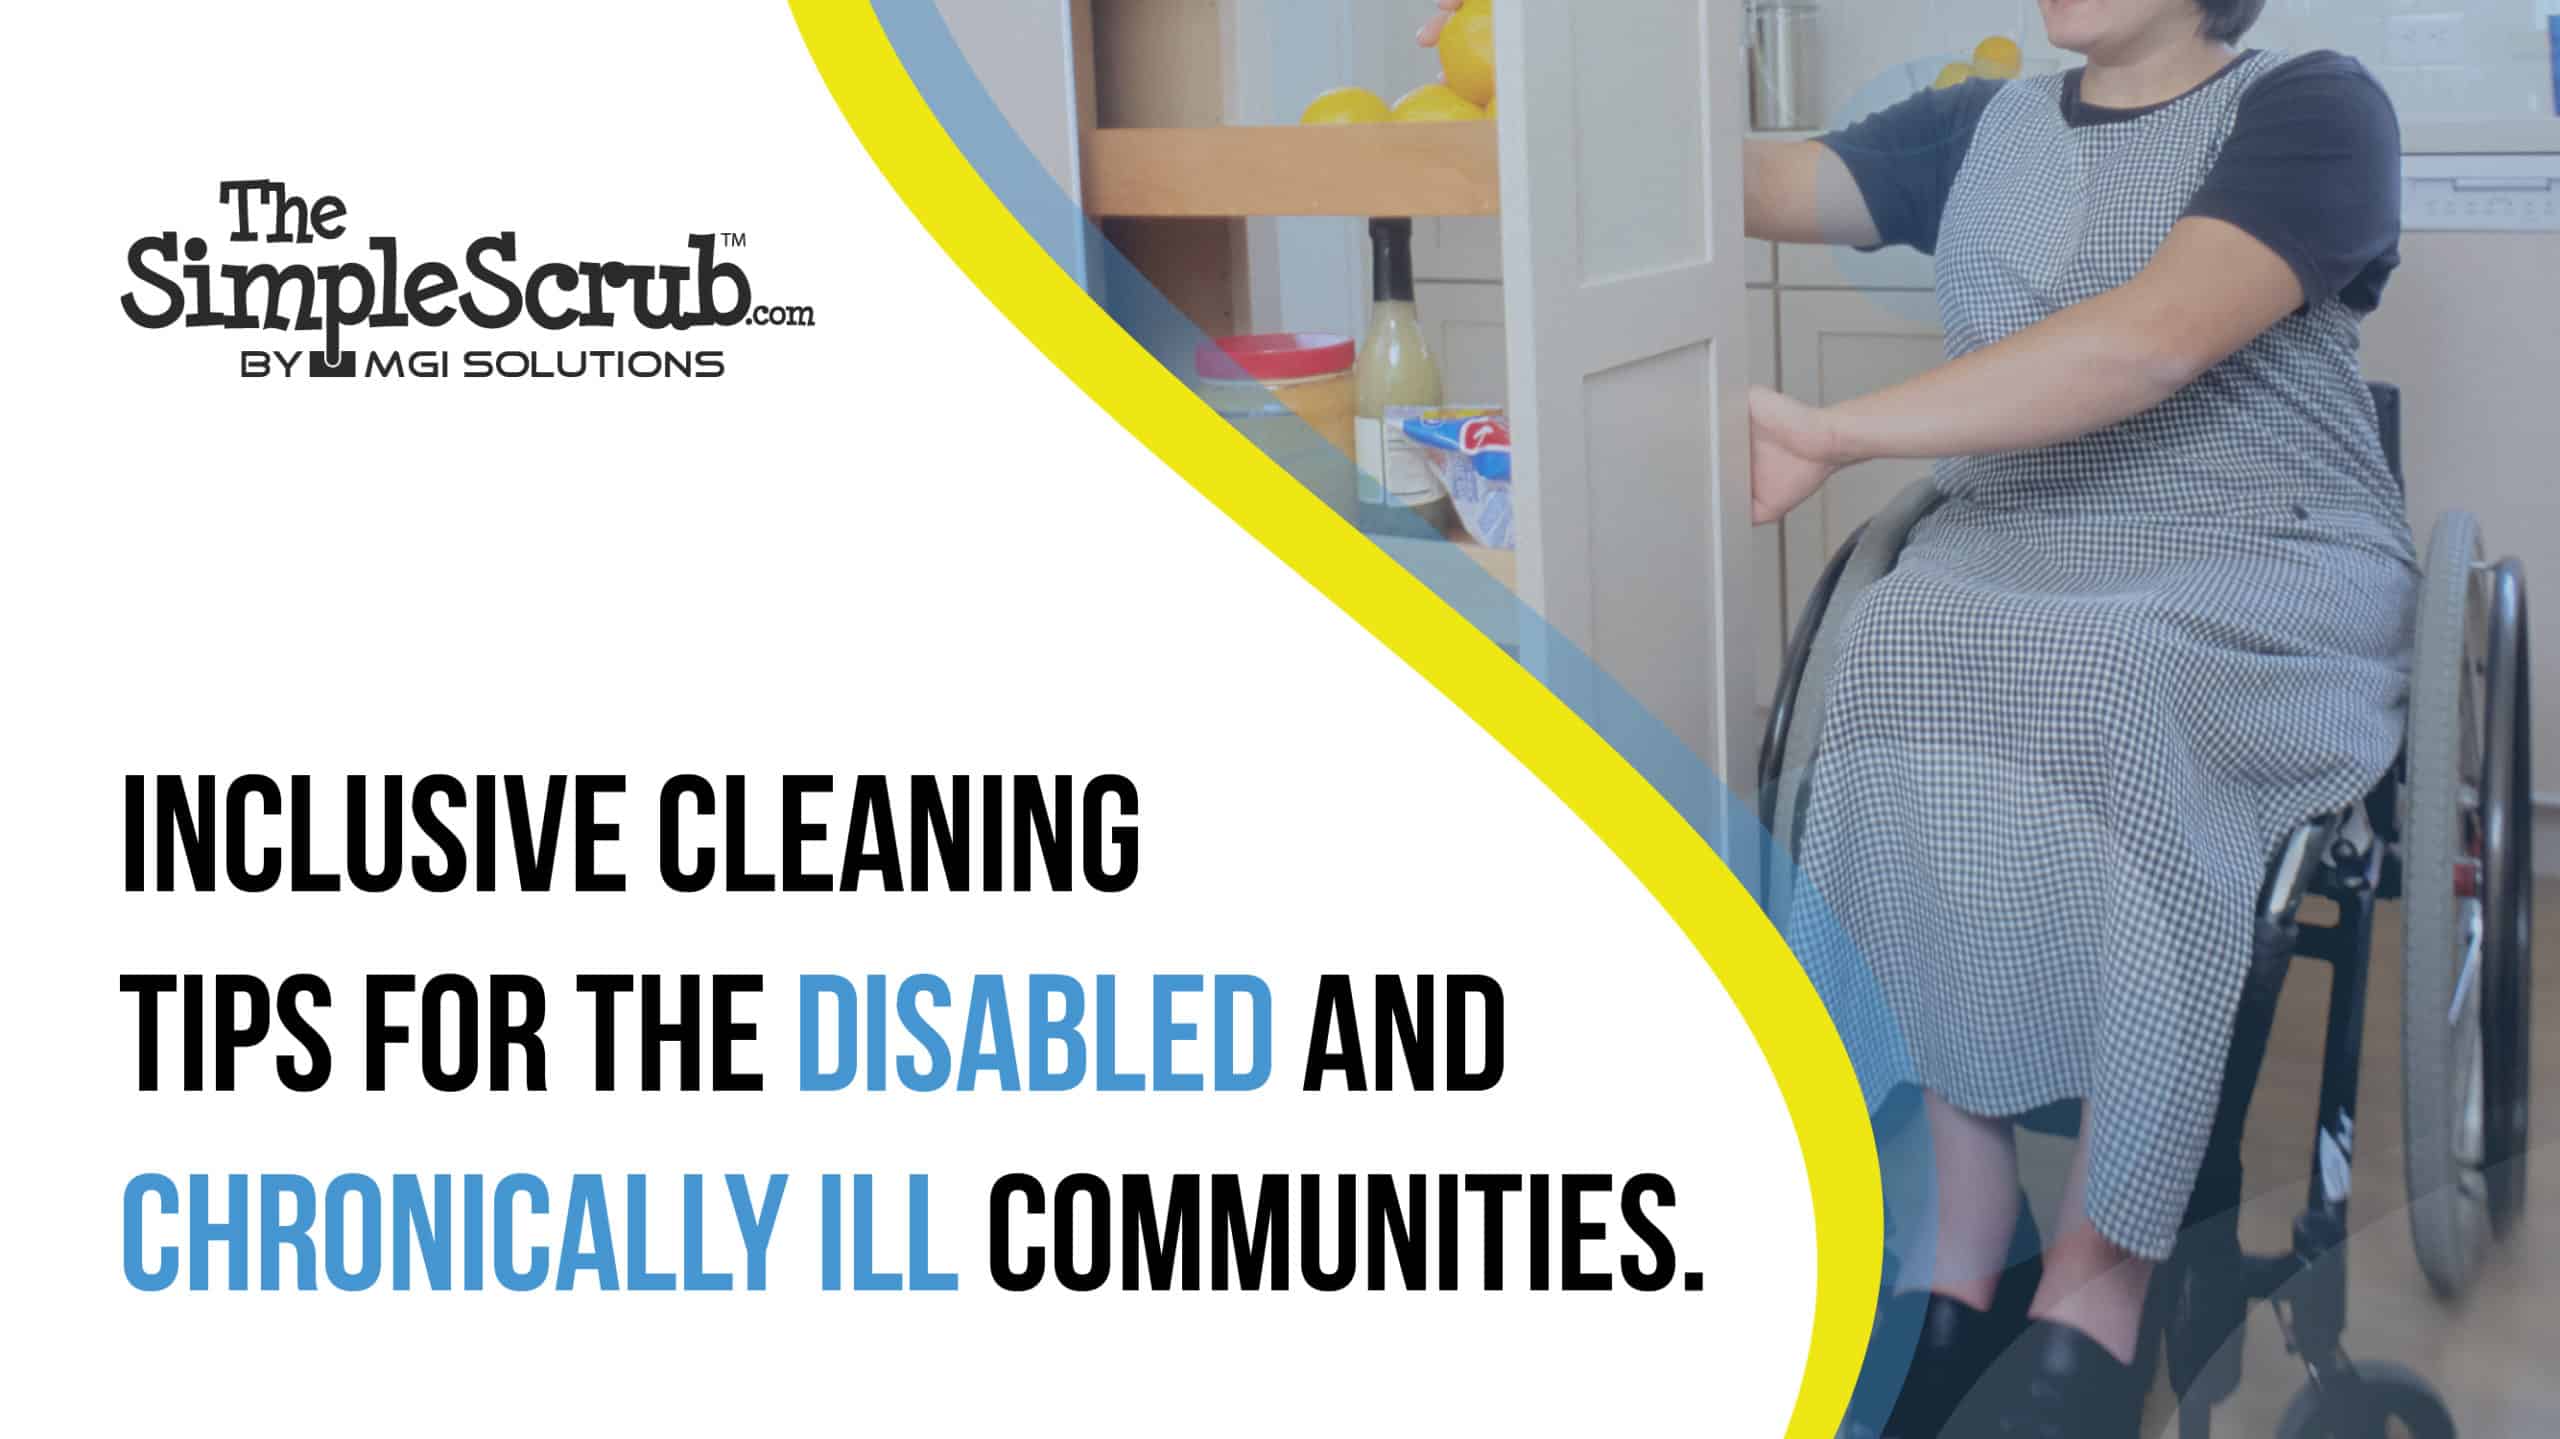 Inclusive Cleaning Tips for The Disabled and Chronically Ill Communities featured image